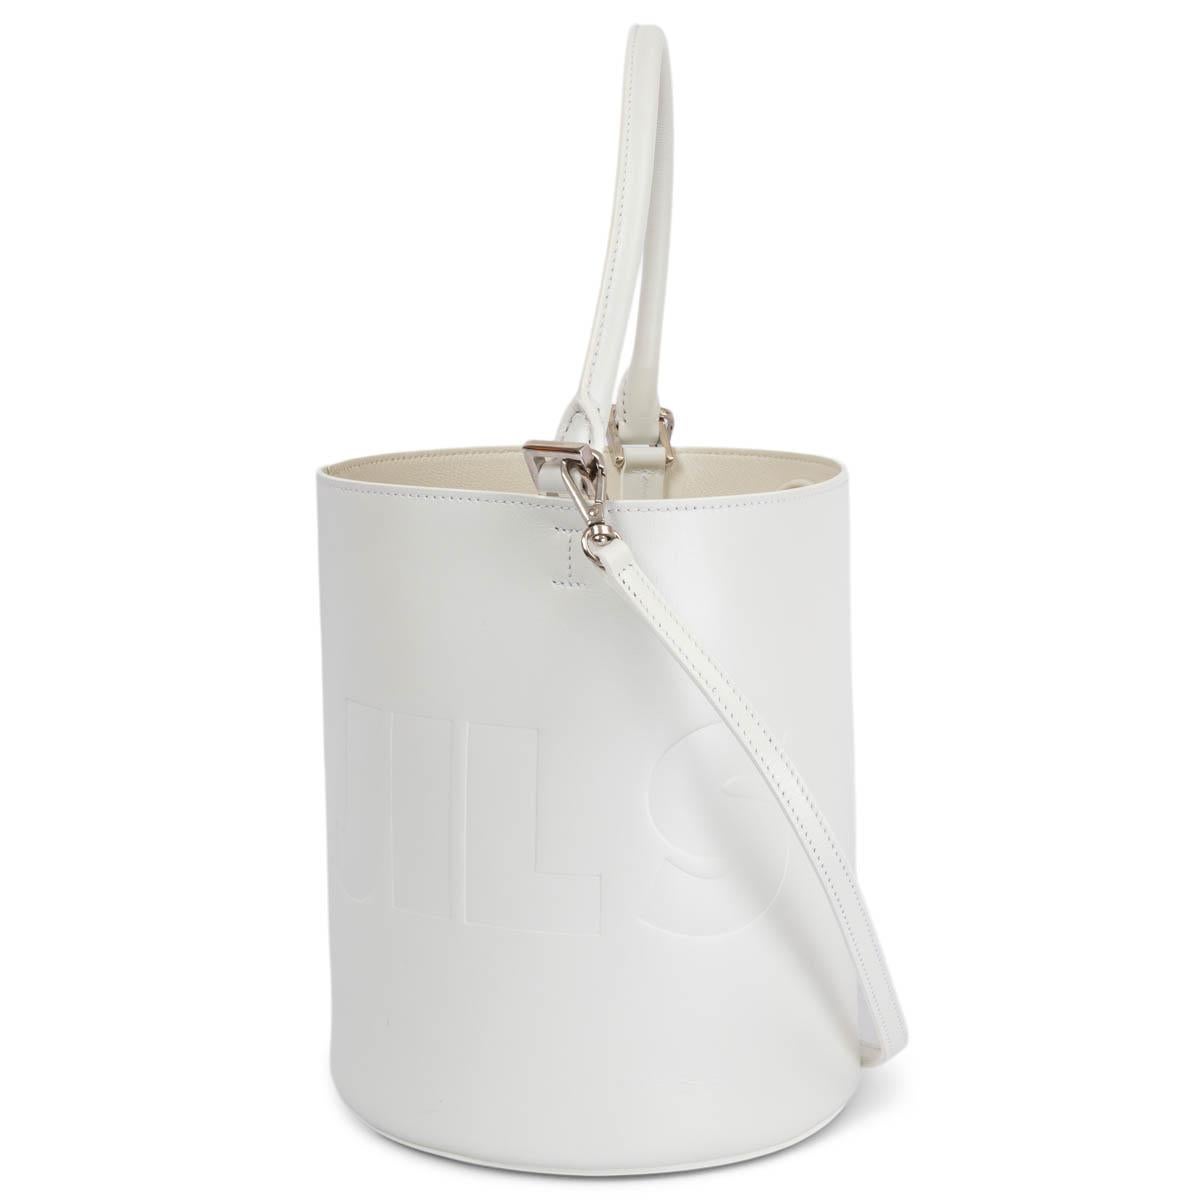 100% authentic Jil Sander round bucket bag in white calfskin with logo debossing and a detachable shoulder-strap. The design features a soft inside pouch in ivory leather and drawstring closure. The inside pouch is attached with push-buttons and can